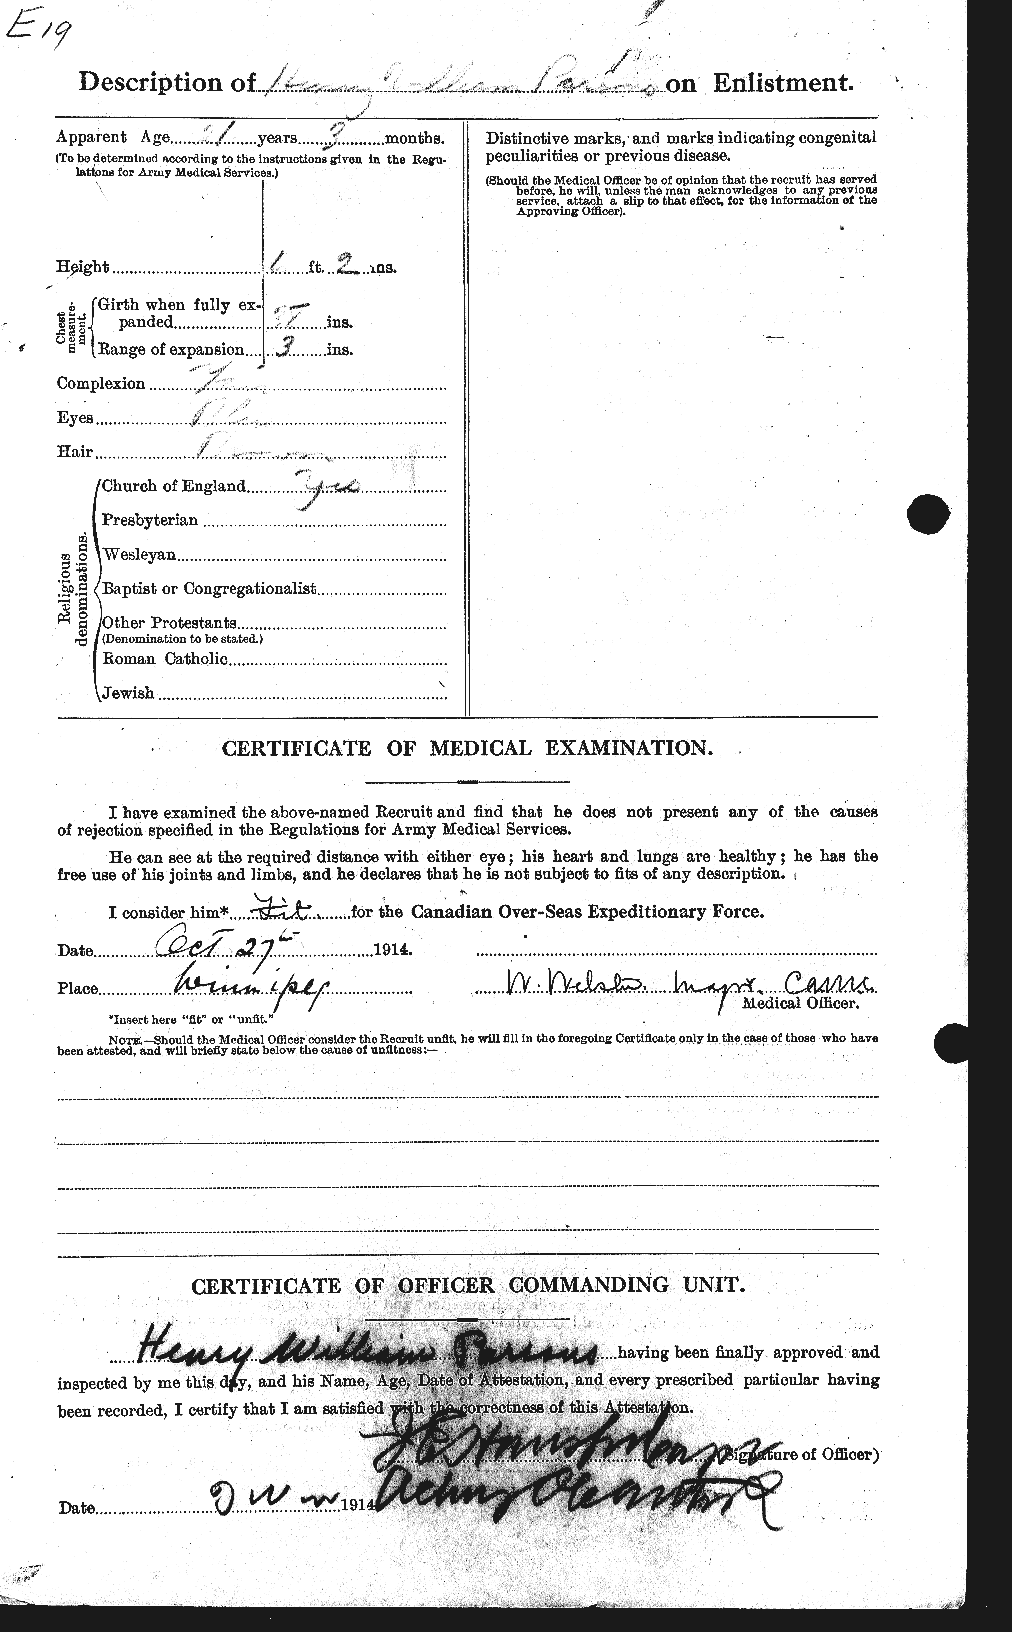 Personnel Records of the First World War - CEF 566892b